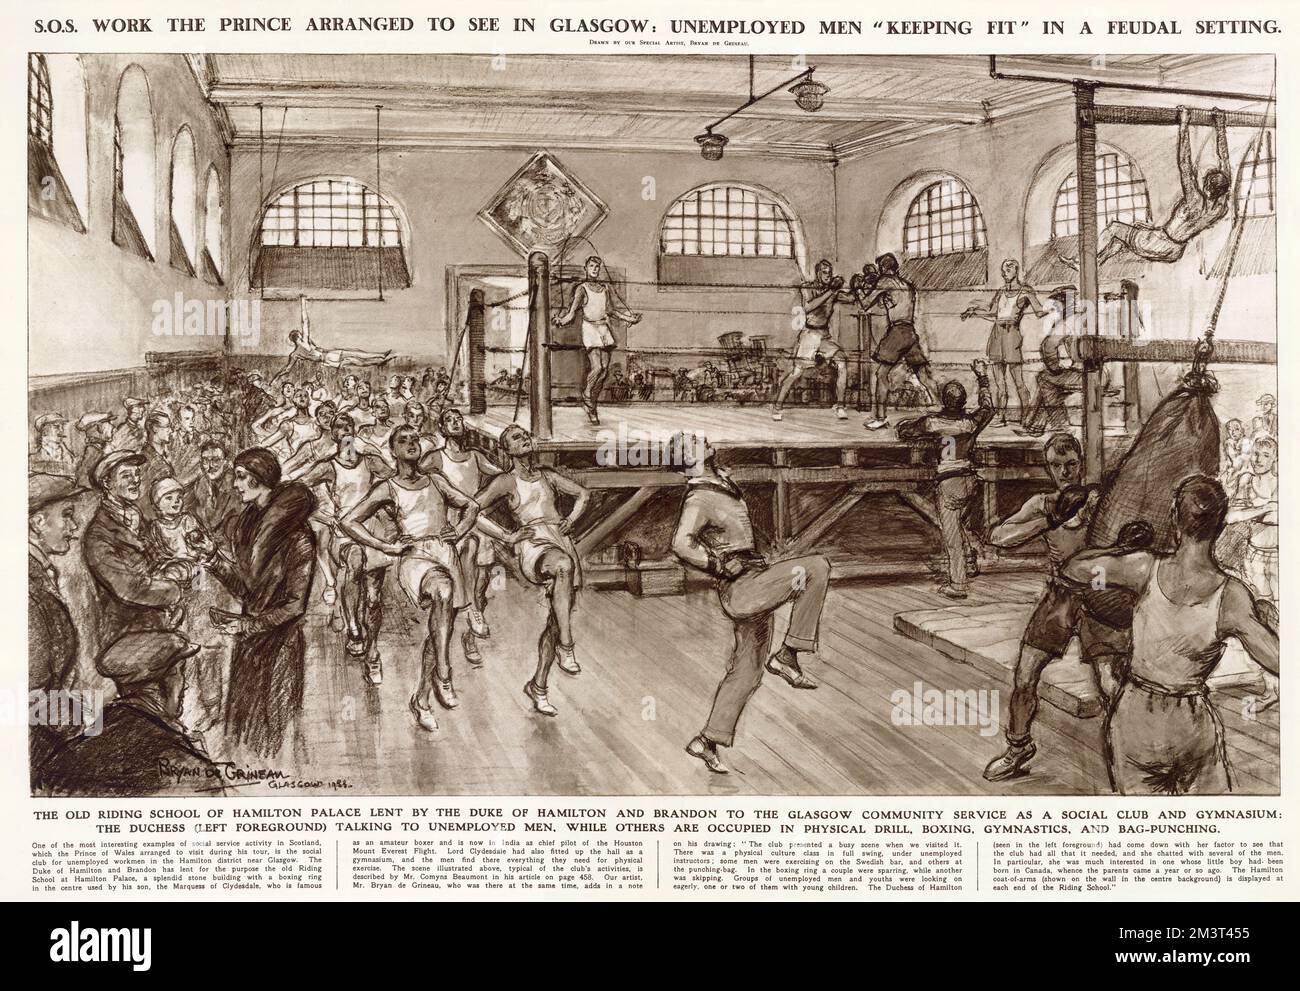 Unemployed men keeping fit at the old riding school of Hamilton Palace, lent by the Duke of Hamilton and Brandon to the Glasgow community service as a social club and gymnasium. The Duchess of Hamilton can be seen on the left talking to unemployed men, while others are occupied in physical drill, boxing, gymnastics and bag punching. One of a number of initiatives set up in Scotland under a scheme known as S.O.S (Scotland on Social Service) intended to counteract the hardships of unemployment and provide occupation for men who were out of work. Stock Photo